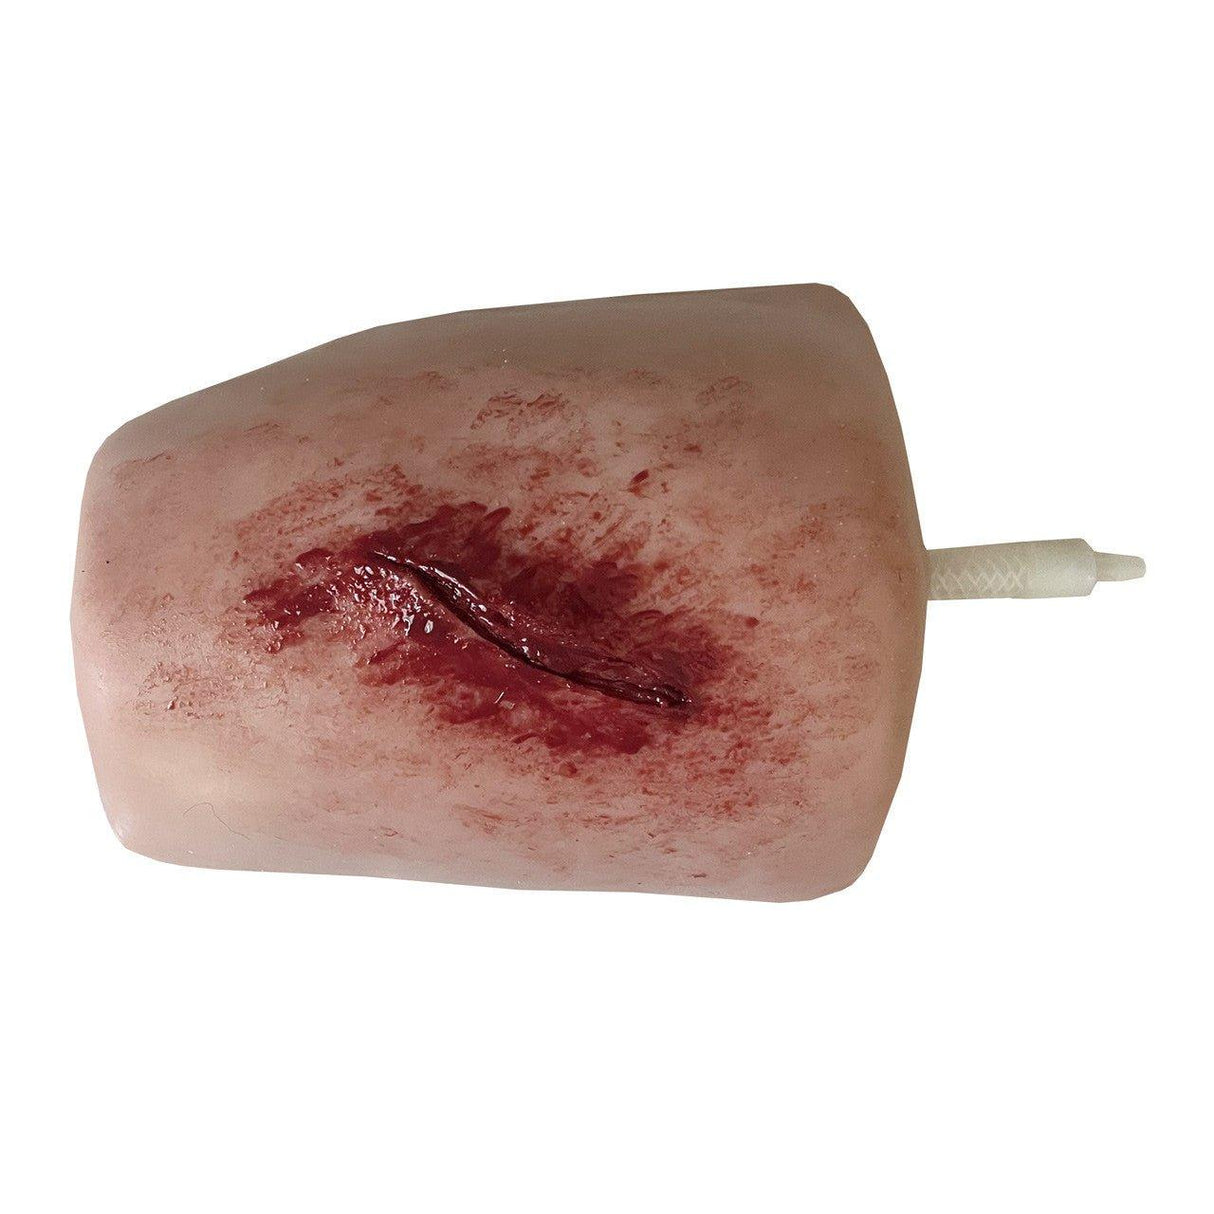 LACERATION Wound Packing Task Trainer - Vendor